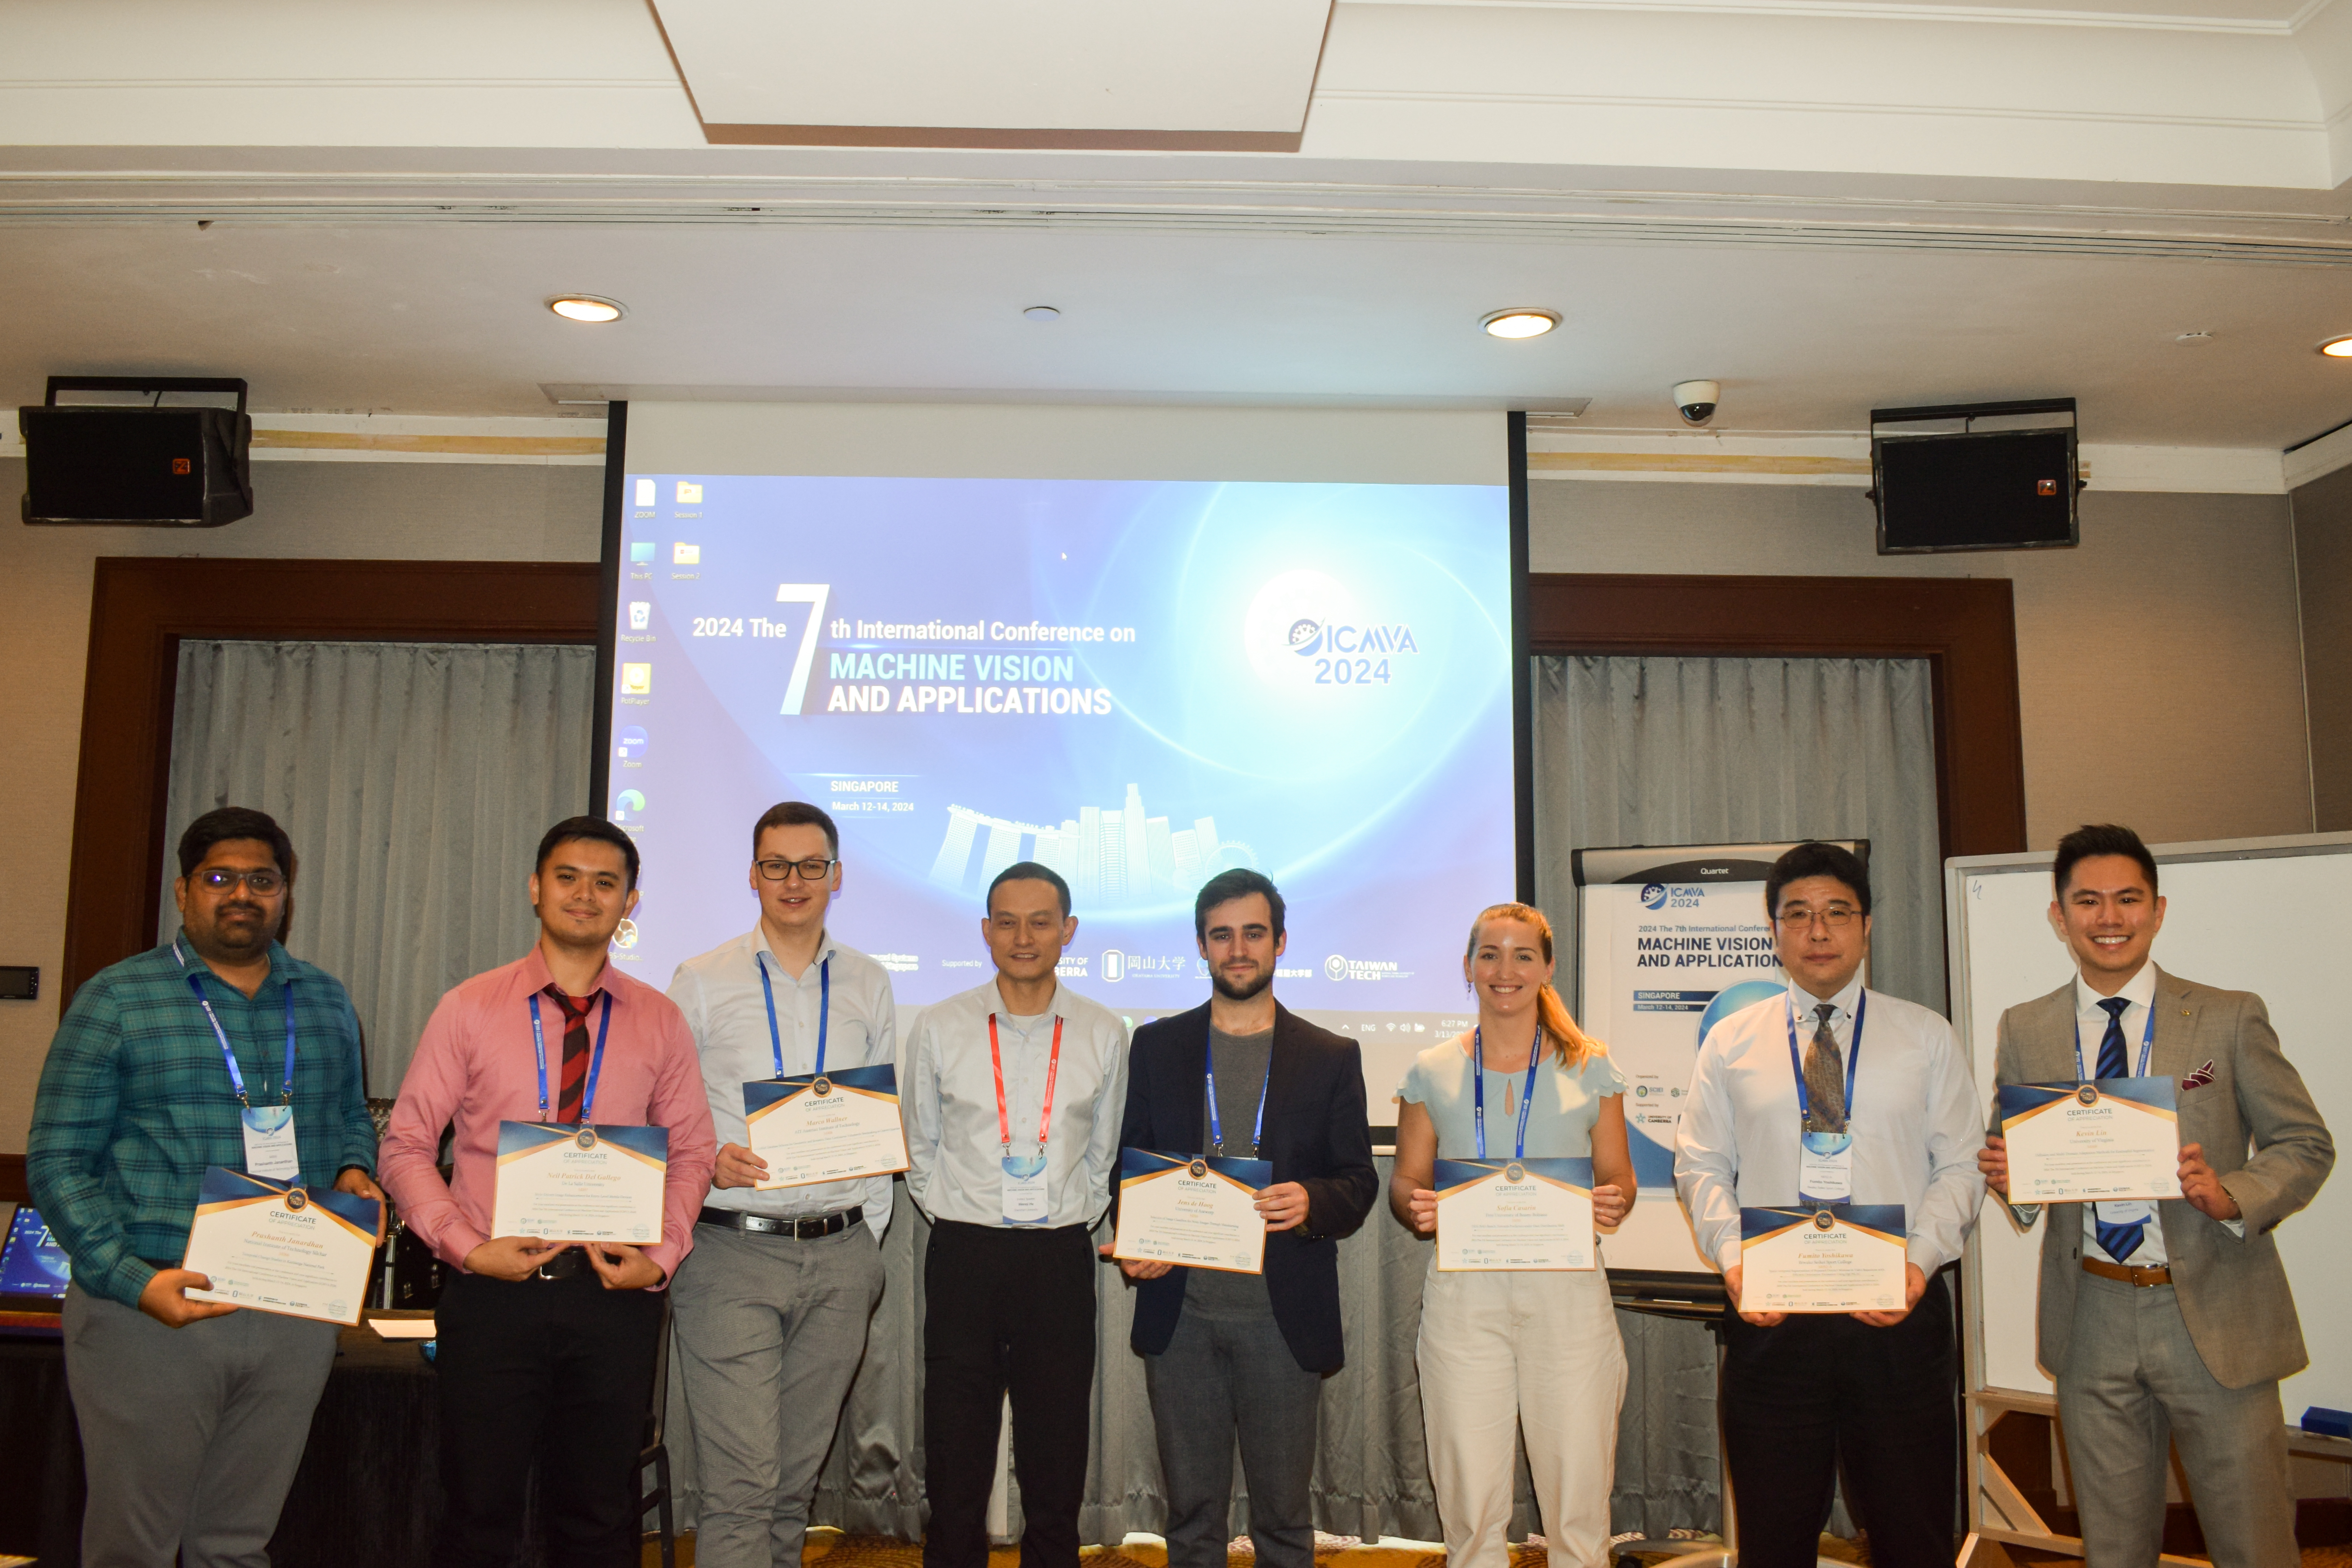 Data Science PhD Candidate Kevin Lin and others receiving awards at the International Conference on Machine Vision and Applications in Singapore